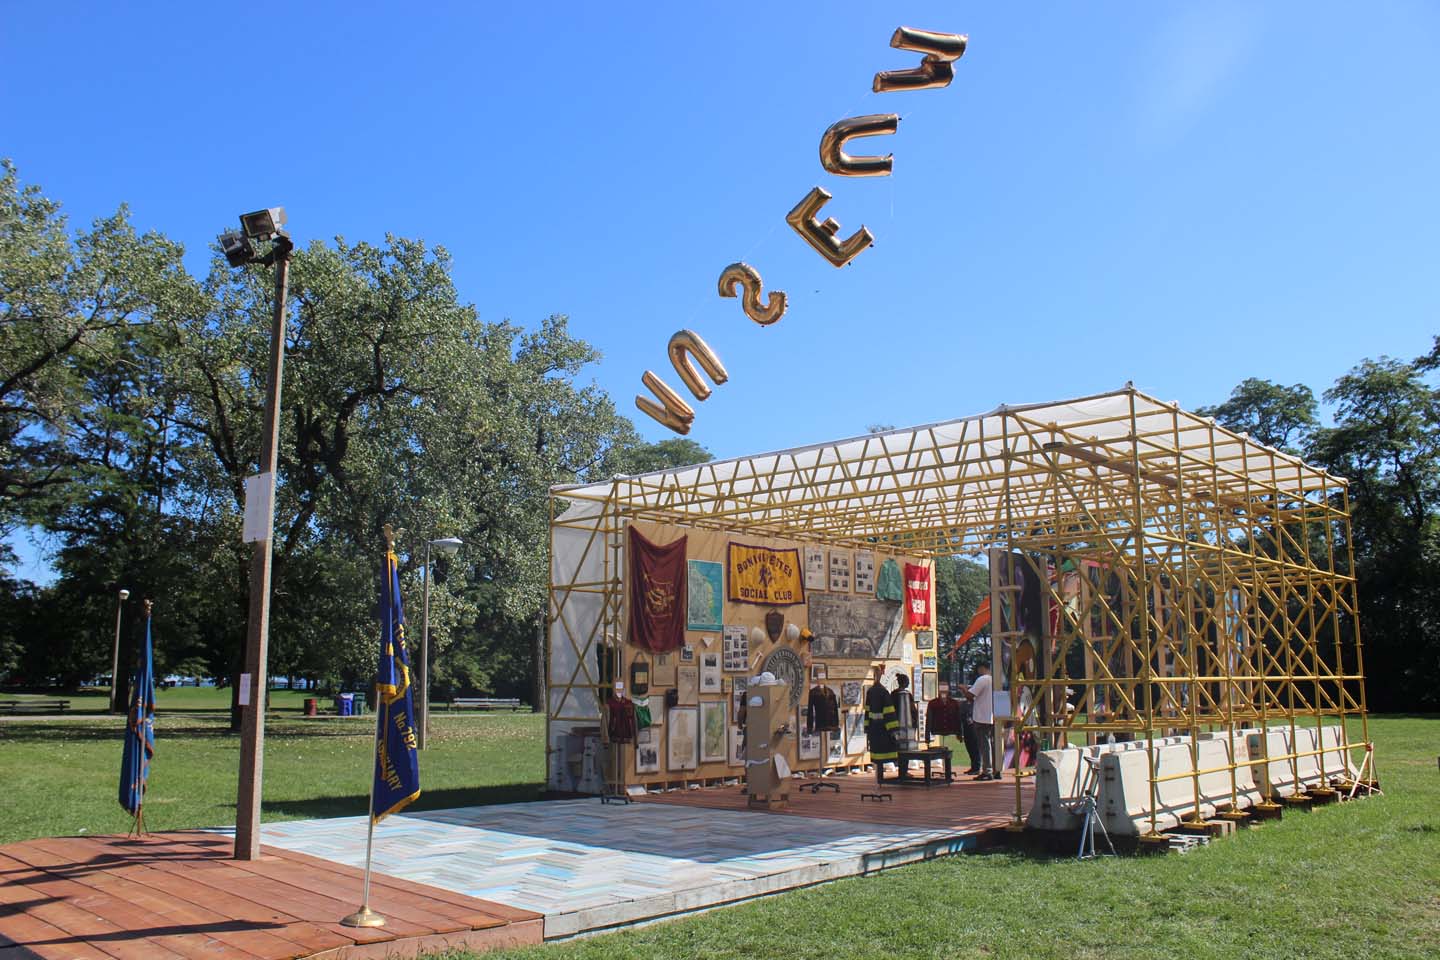 Faheem Majeed, Floating Museum, (Chicago, IL), Summer 2016, Floating Museum Pavilion at Calumet Park Chicago, 2016, Mixed Media. Image courtesy of the artist.